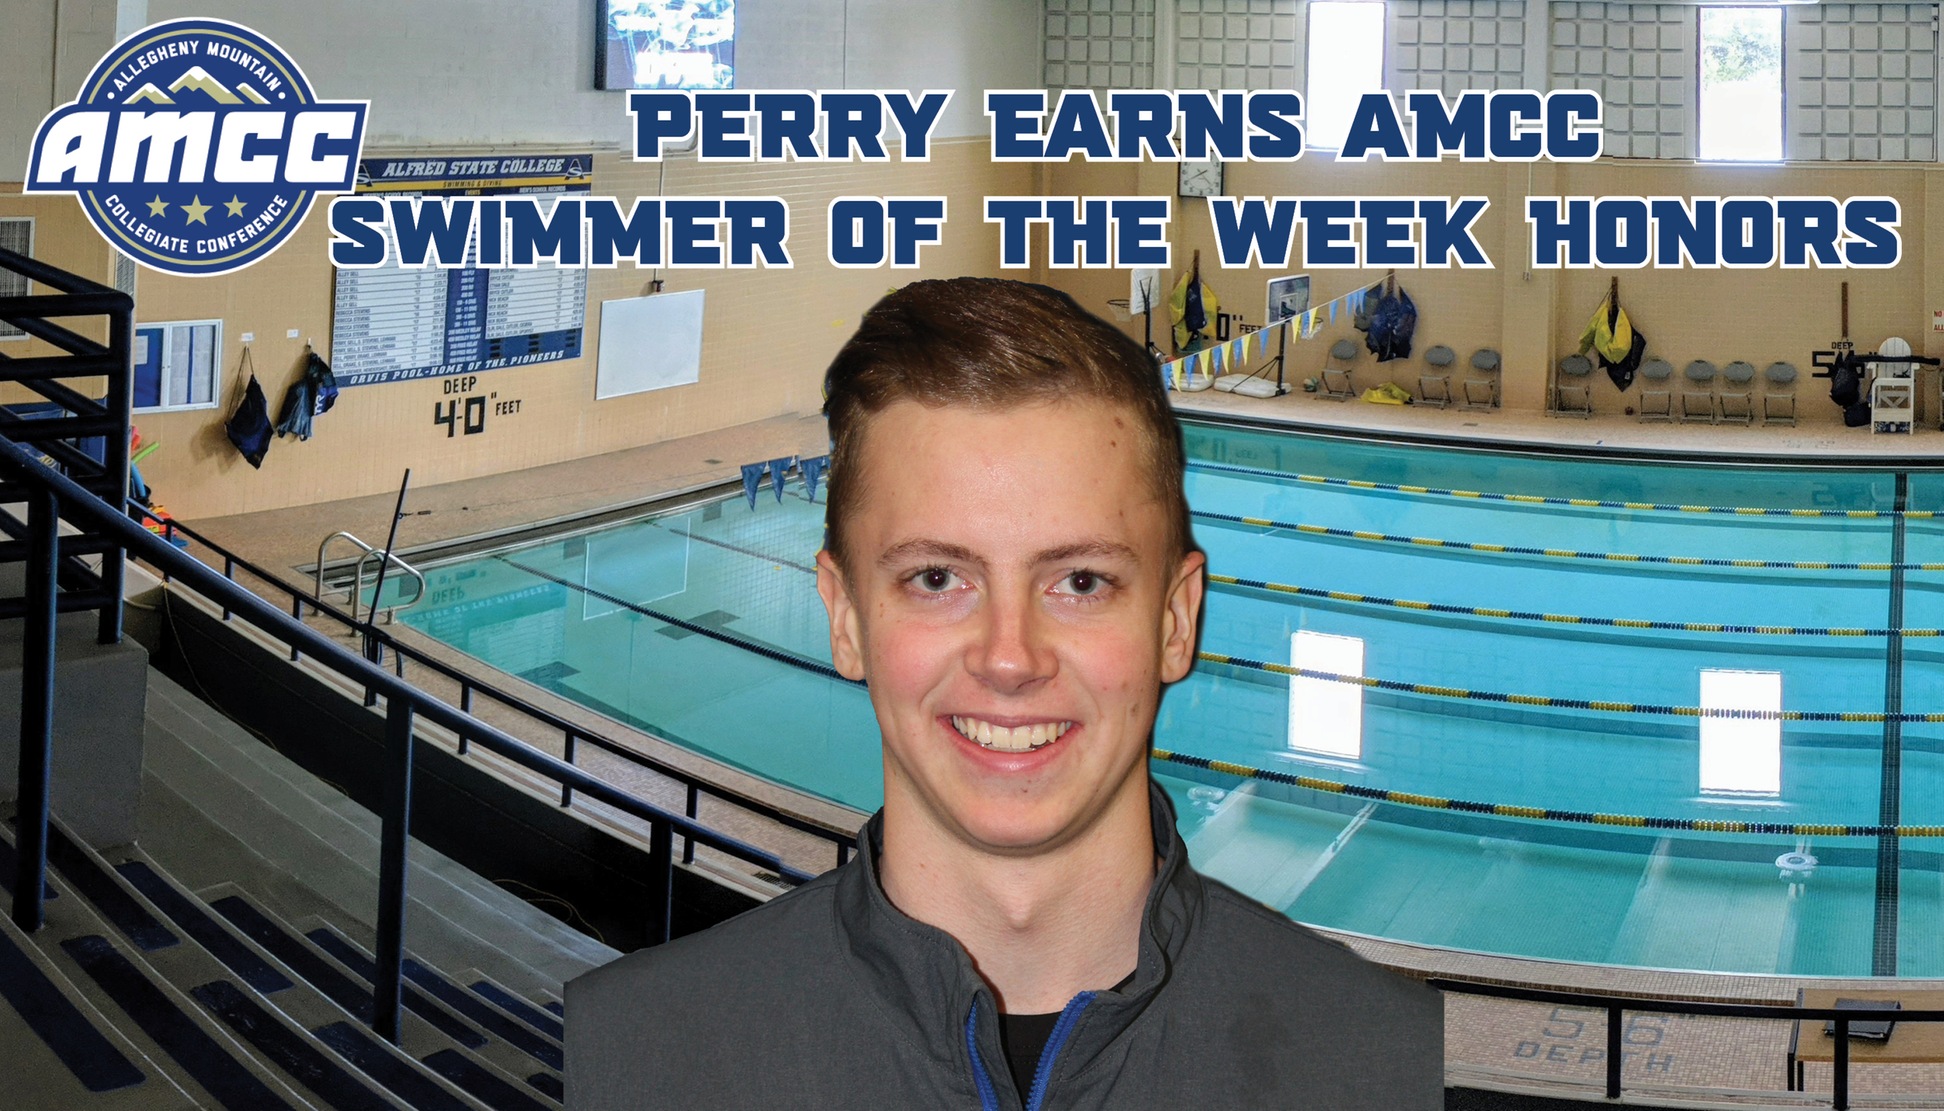 Westin Perry has been named AMCC Swimmer of the Week